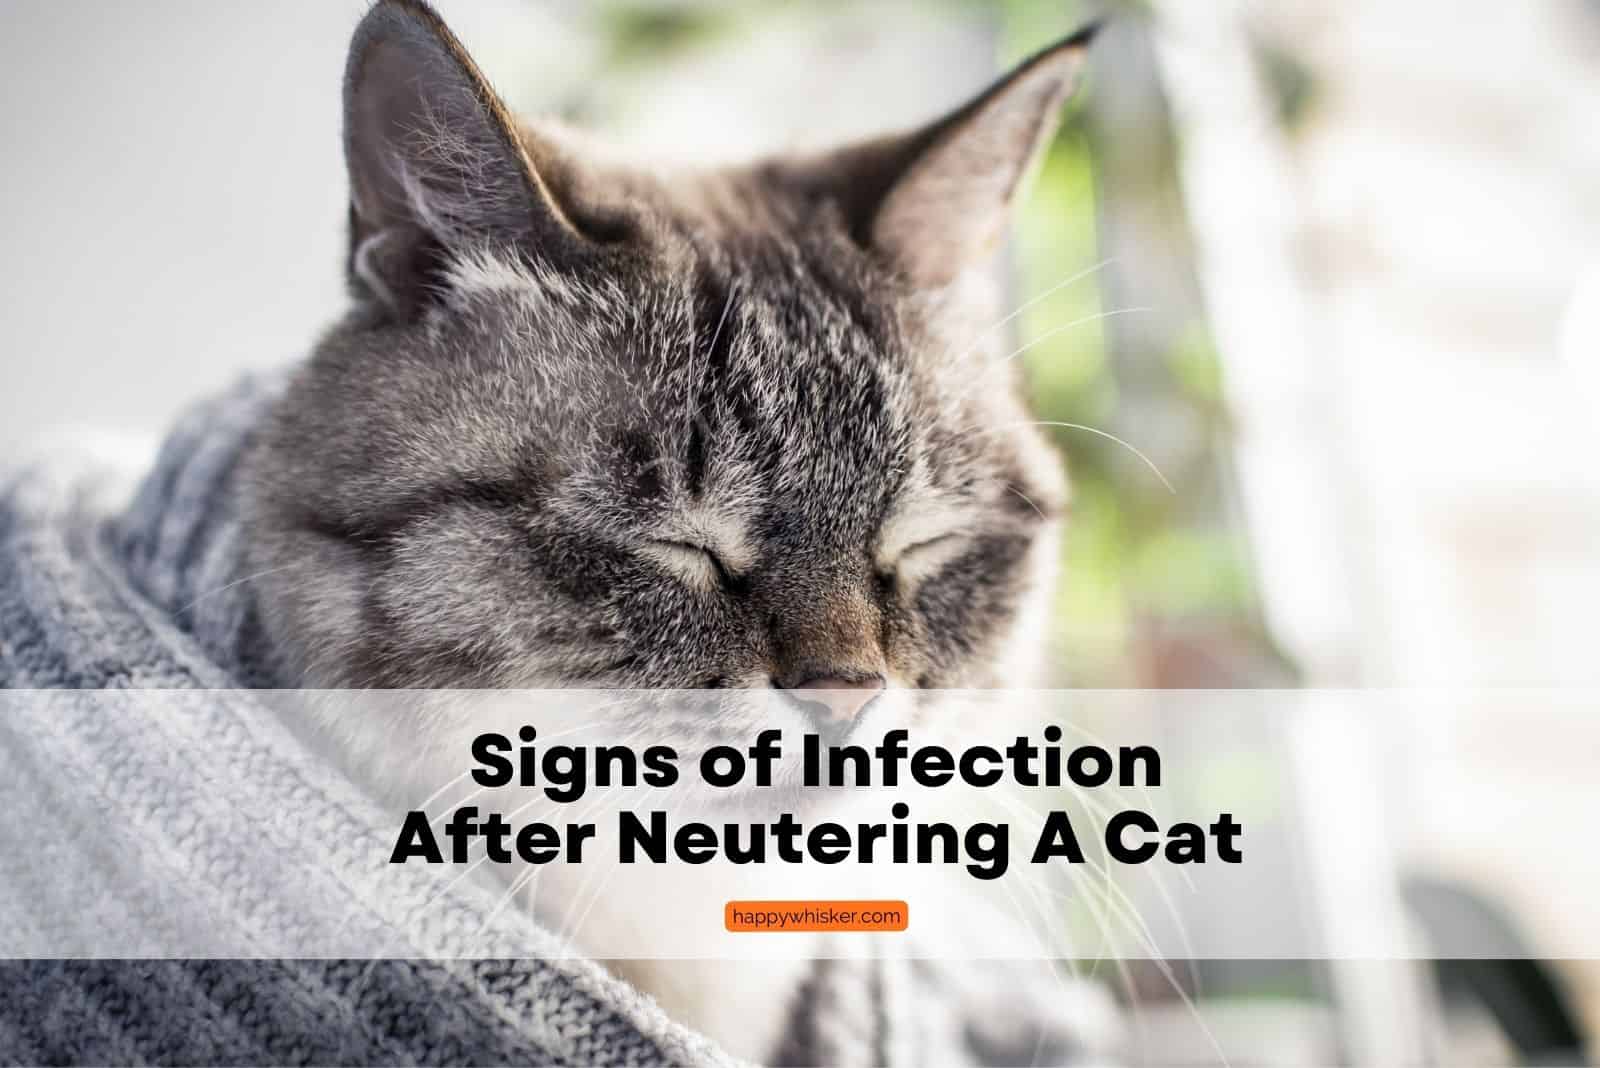 tabby cat showing signs of infection after neutering